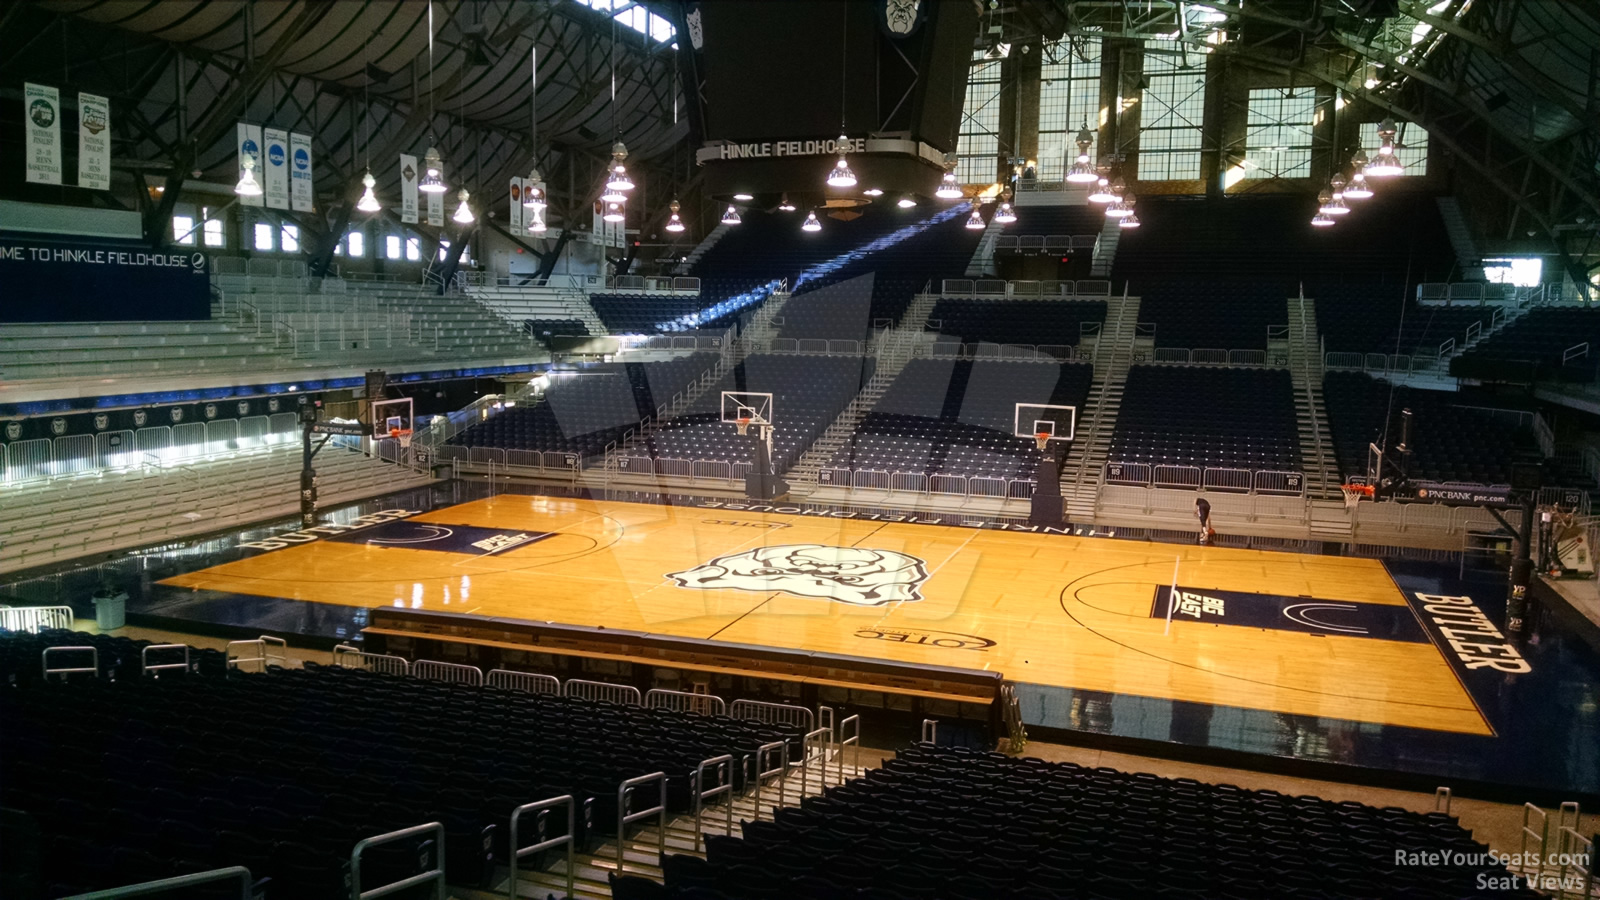 section 205, row 3 seat view  - hinkle fieldhouse